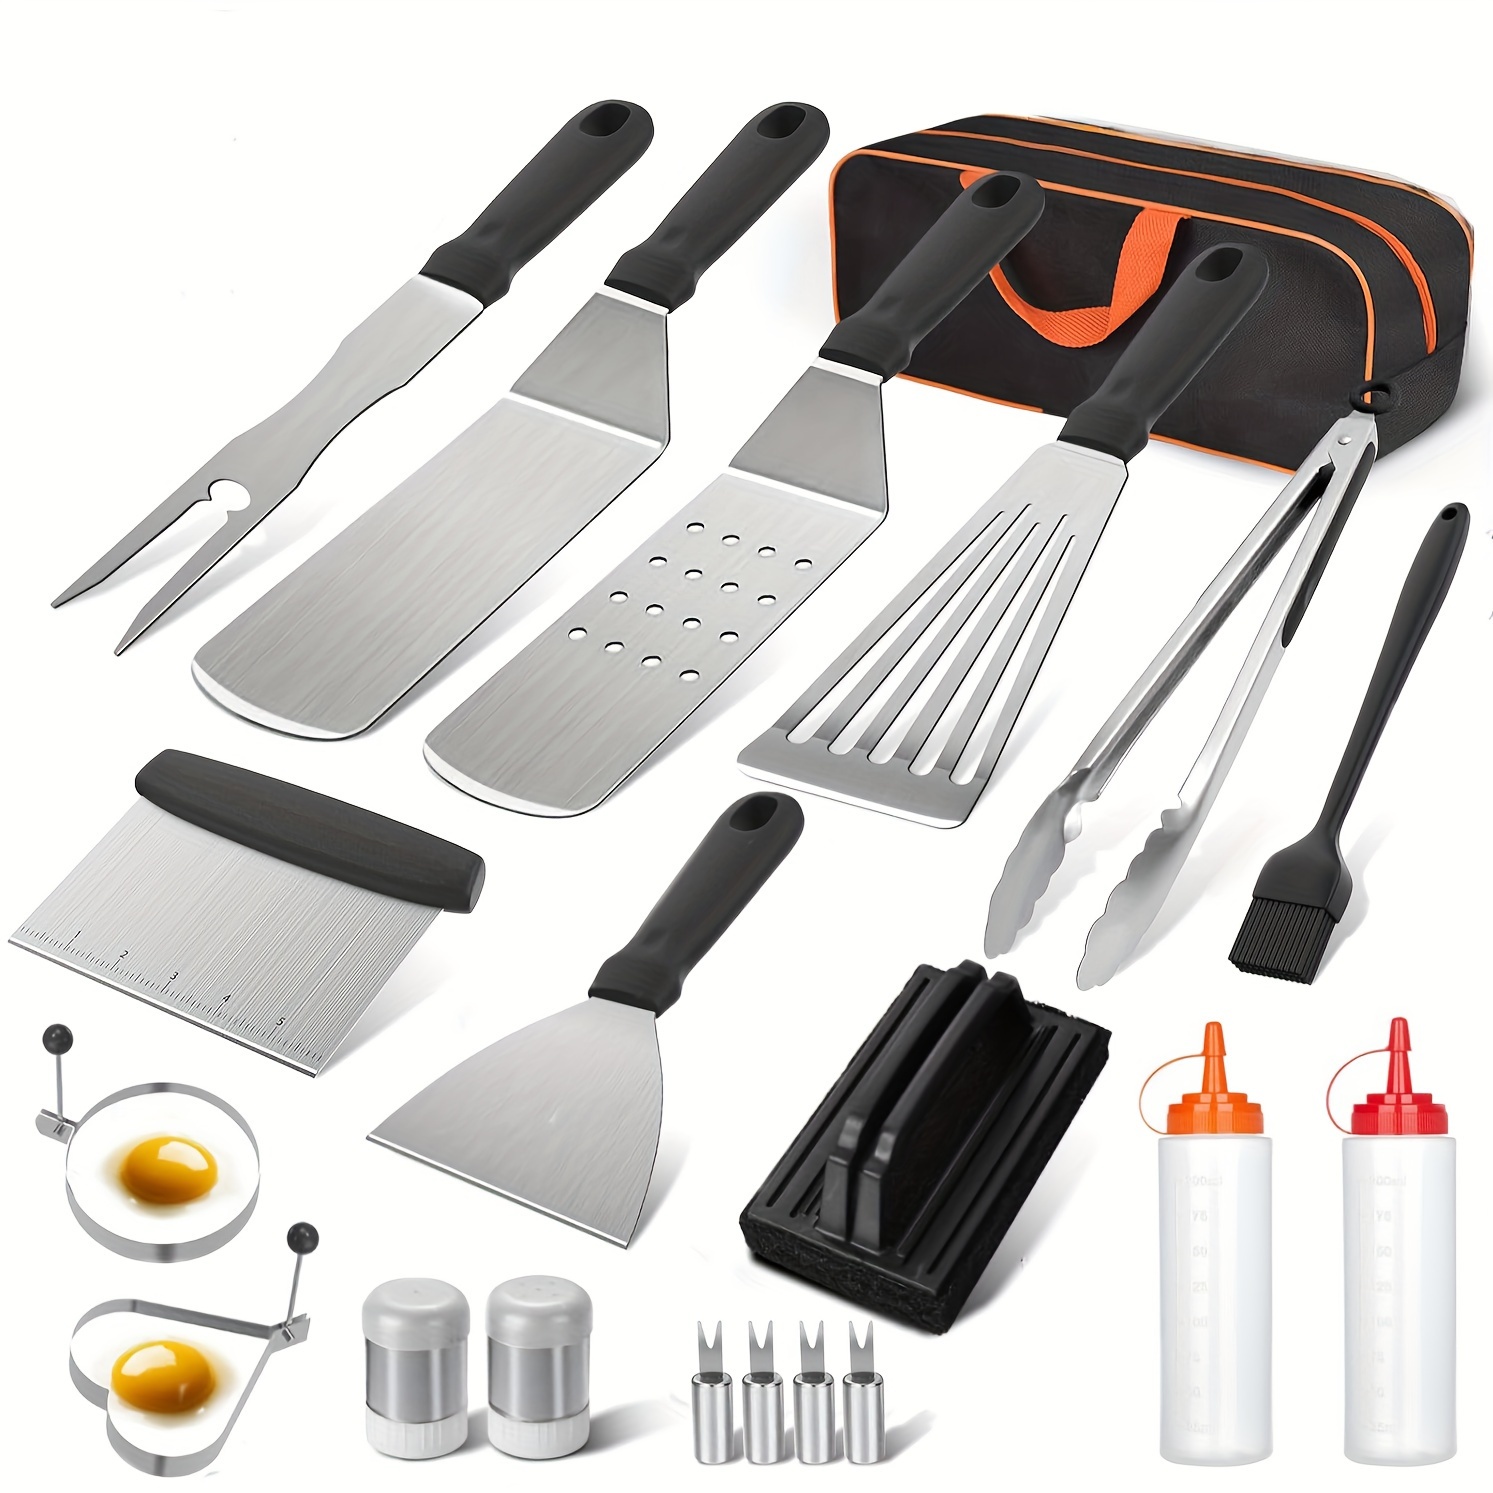 

20-piece Stainless Steel Bbq Grill Tool Set With Griddle Accessories - Outdoor And Indoor Barbecue Kit With Long Spatulas, Chopper, , Egg Rings, Tongs, Condiment Bottles For Camp Chefs